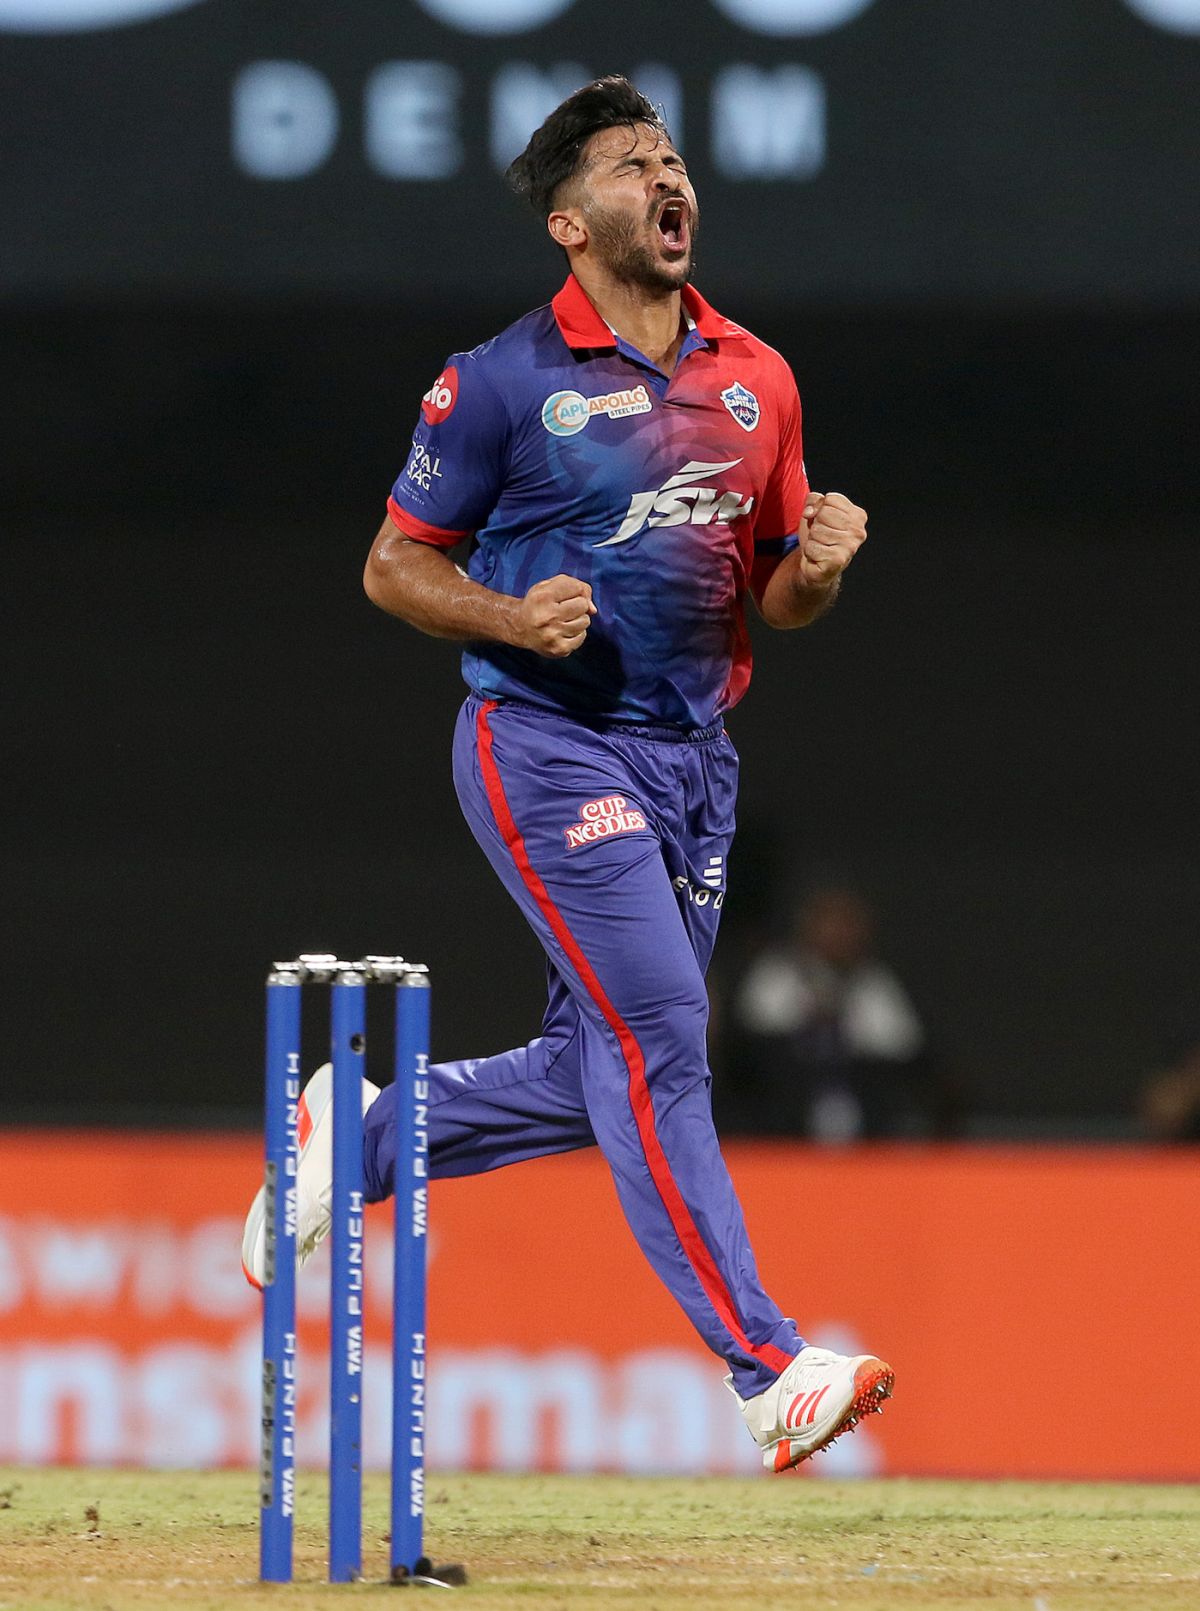 Shardul Thakur had two double-wicket overs ESPNcricinfo